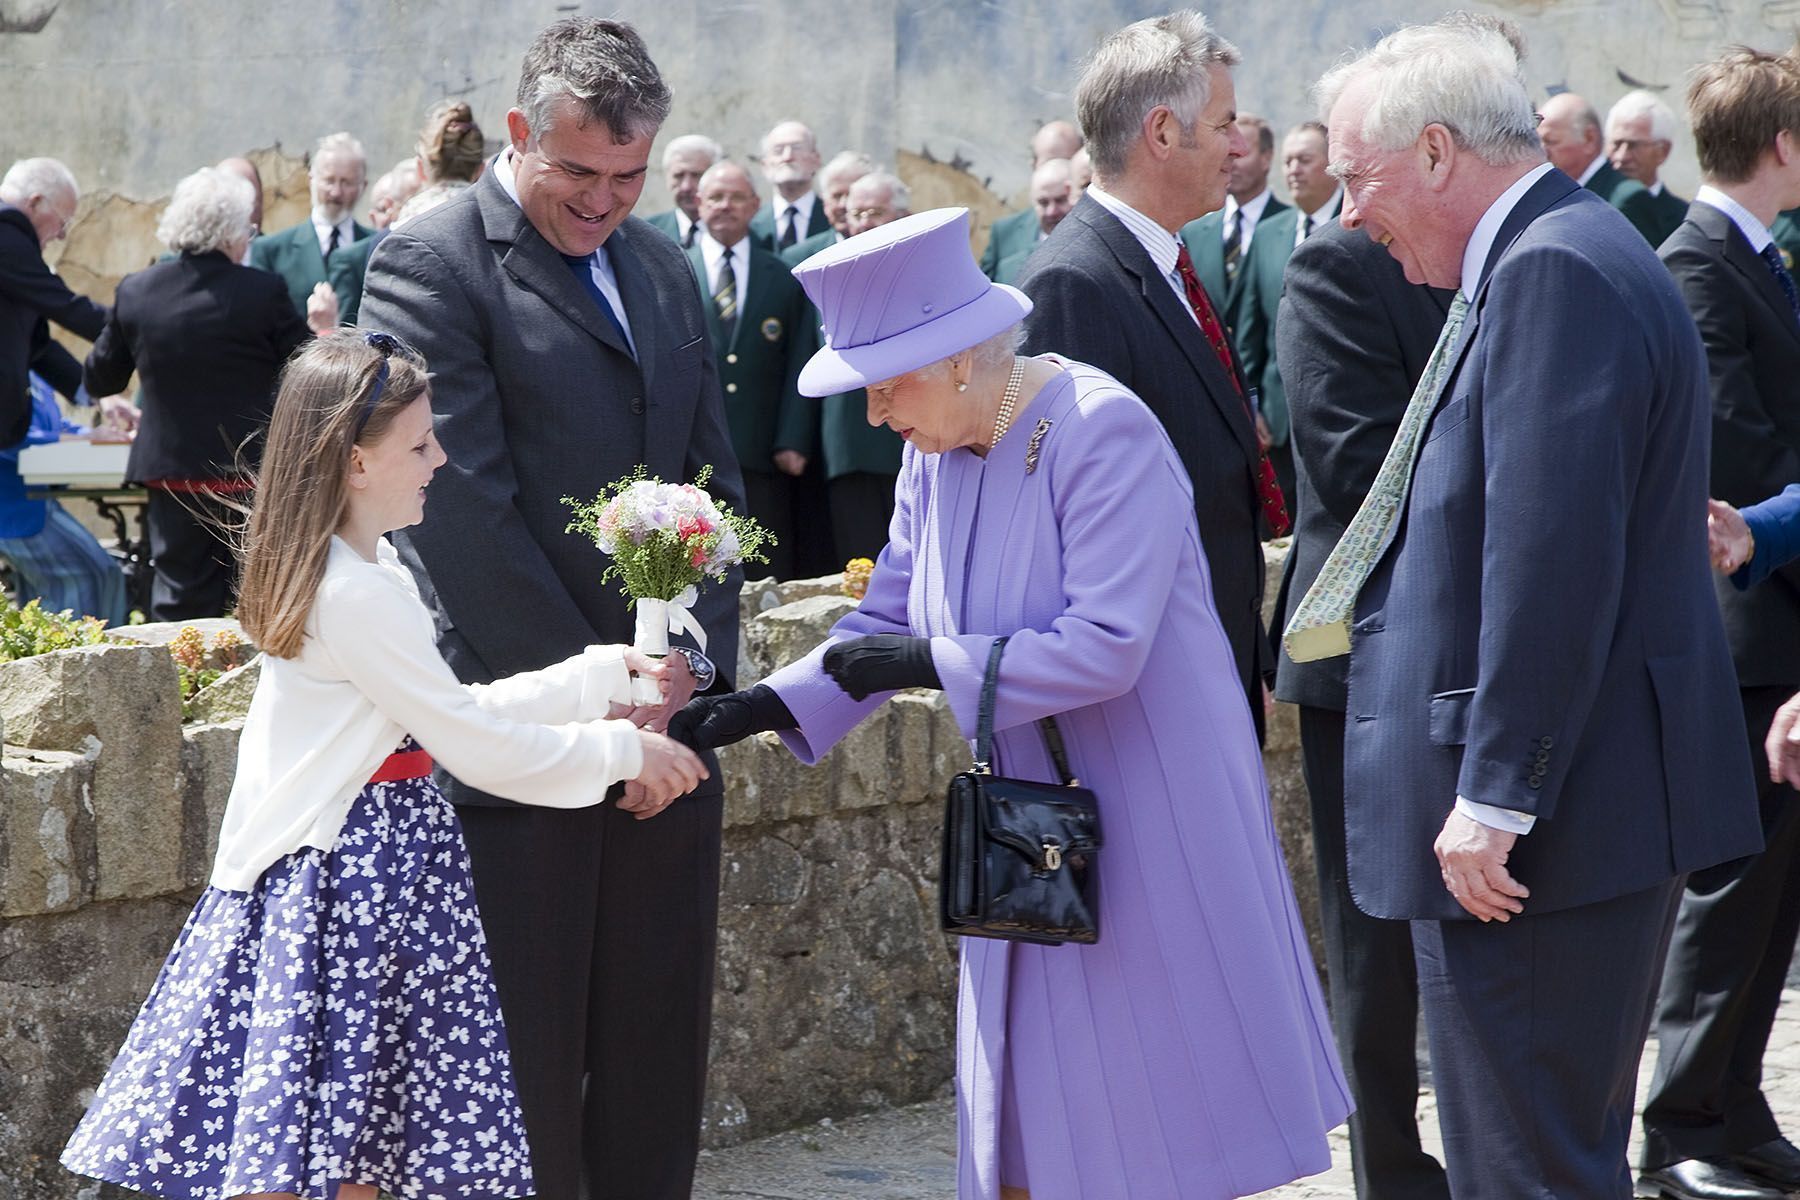 A bouquet for the Queen at St Michaels Mount from Emily Earley aged 9, with Lord St Levan.